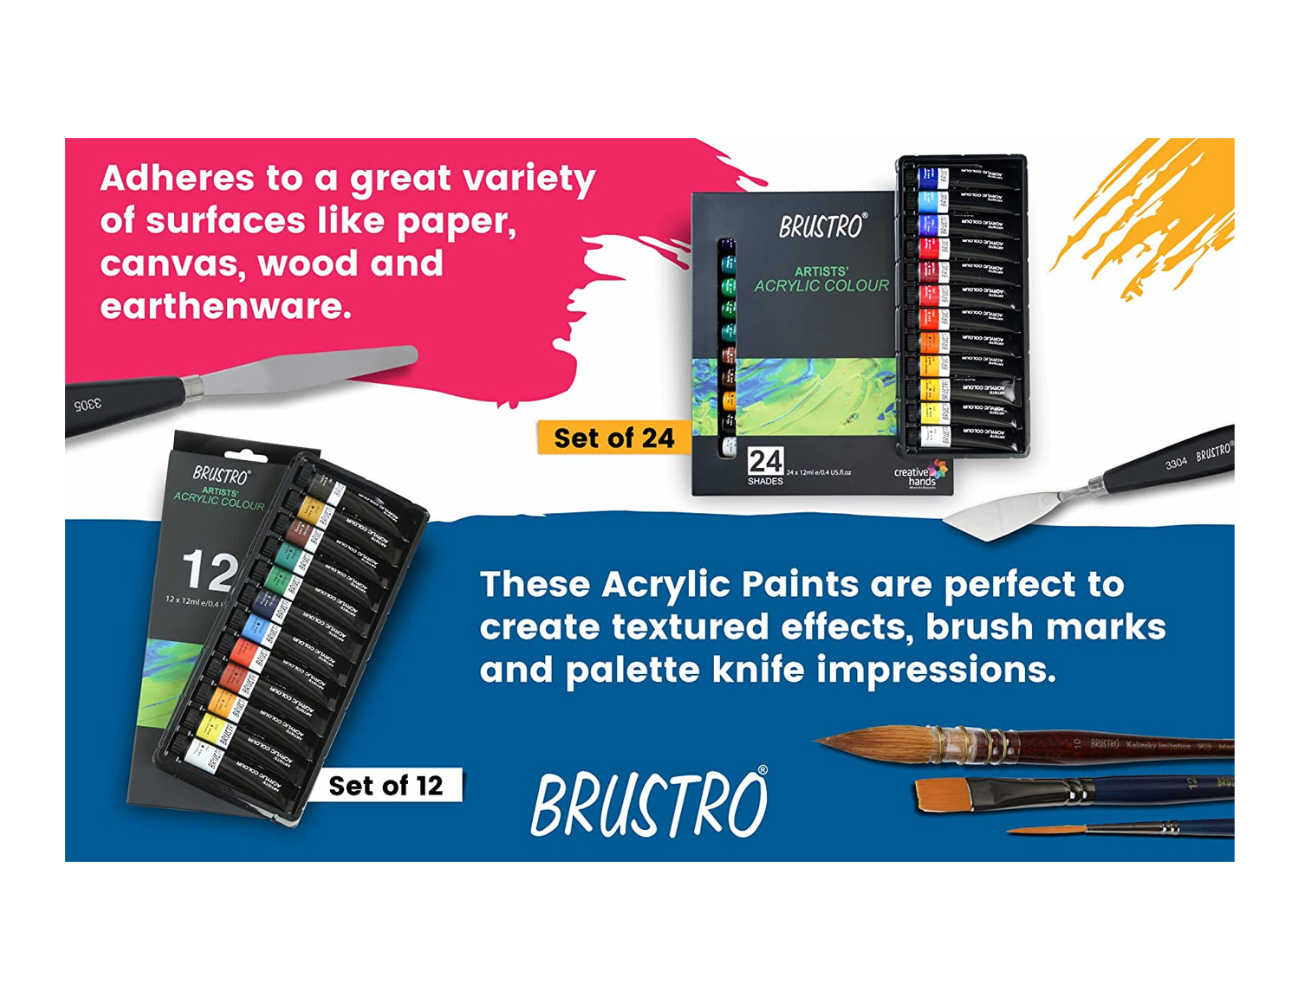 BRUSTRO Artists ’ Acrylic Colour Set of 12 Colours X 12ML Tubes with Gold Taklon Brush Set of 10 and Acrylic Paper 400 GSM A4-12 Sheets.